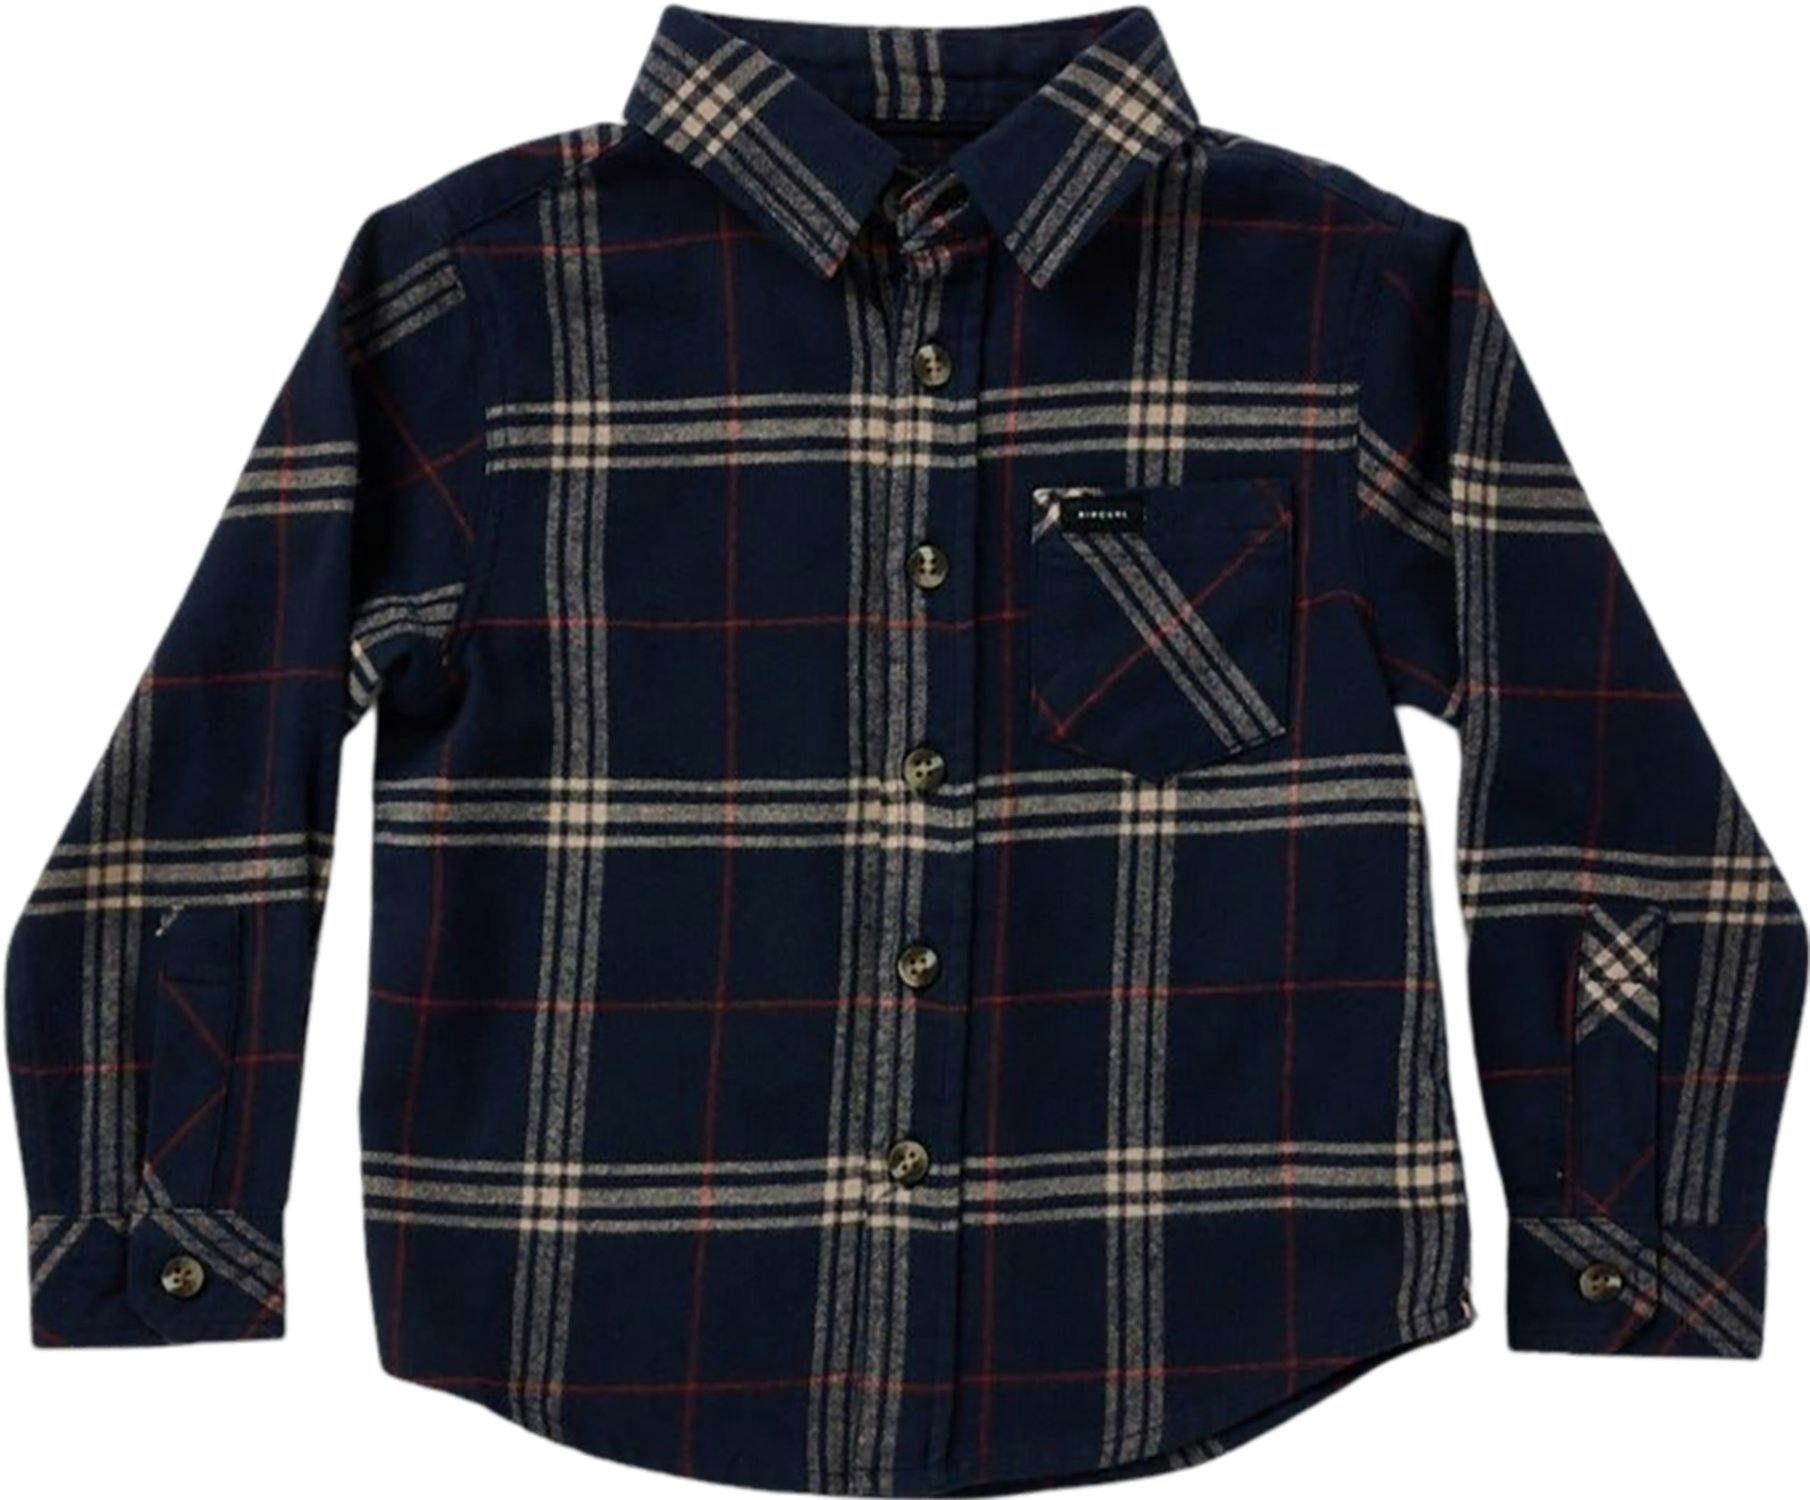 Product image for Checked In Flannel Shirt - Toddler Boys